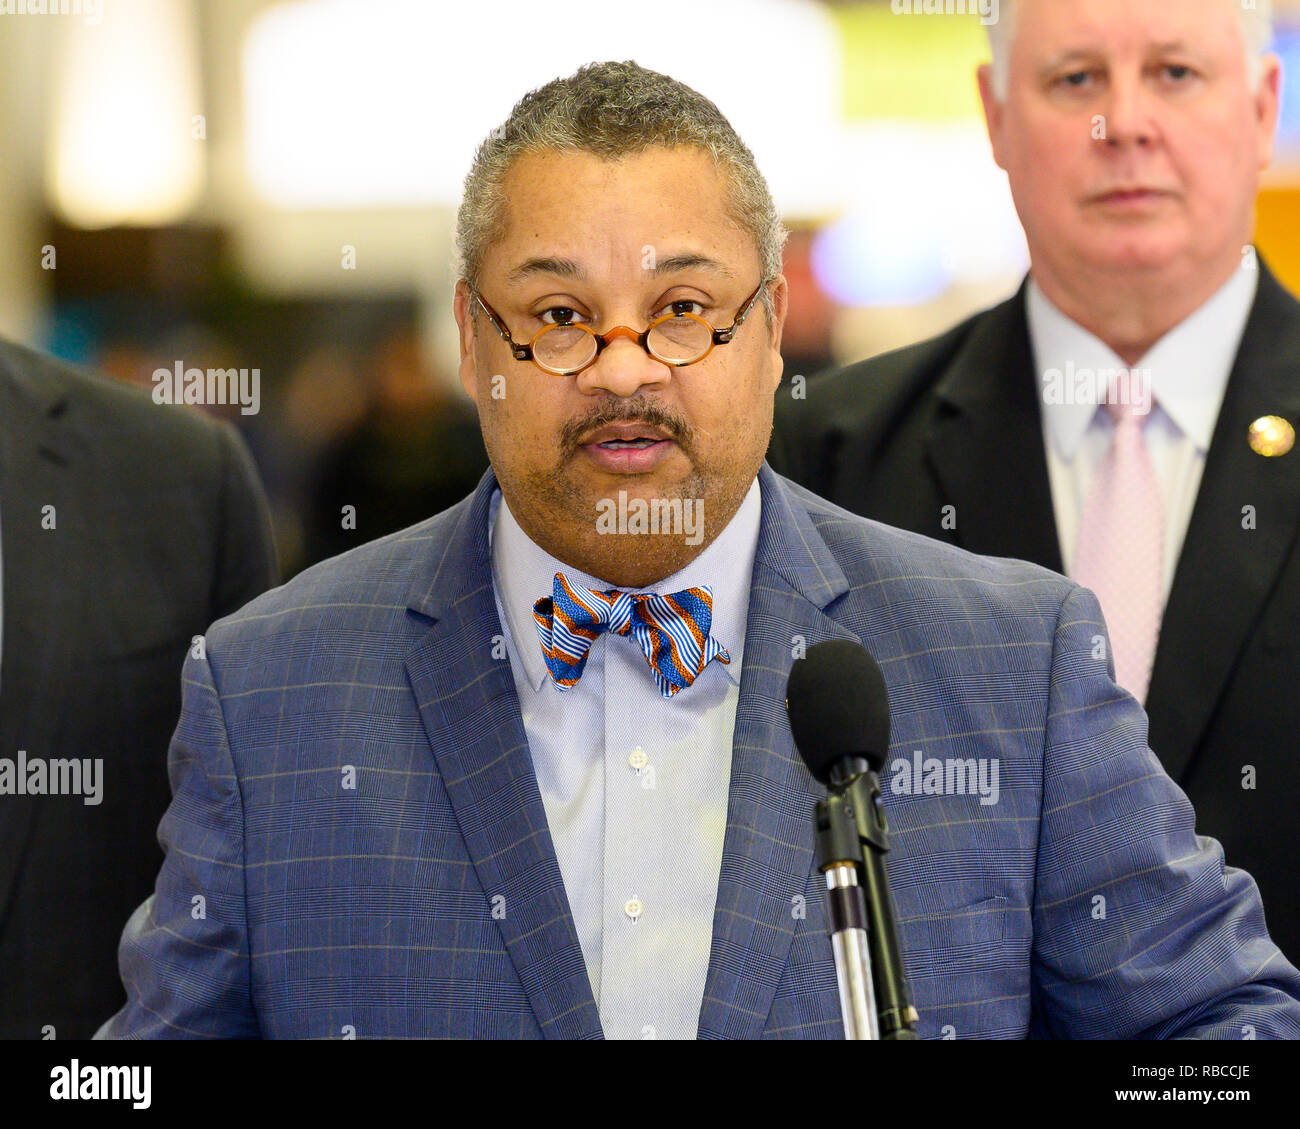 U.S. Representative Donald Payne, Jr. (D-NJ) seen speaking at a news conference at Newark Liberty International Airport to demand an end to the partial government shutdown leaving thousands of federal workers in New Jersey without pay and to highlight the impacts of lost services being felt statewide. At Newark Liberty International Airport in Newark, New Jersey. Stock Photo